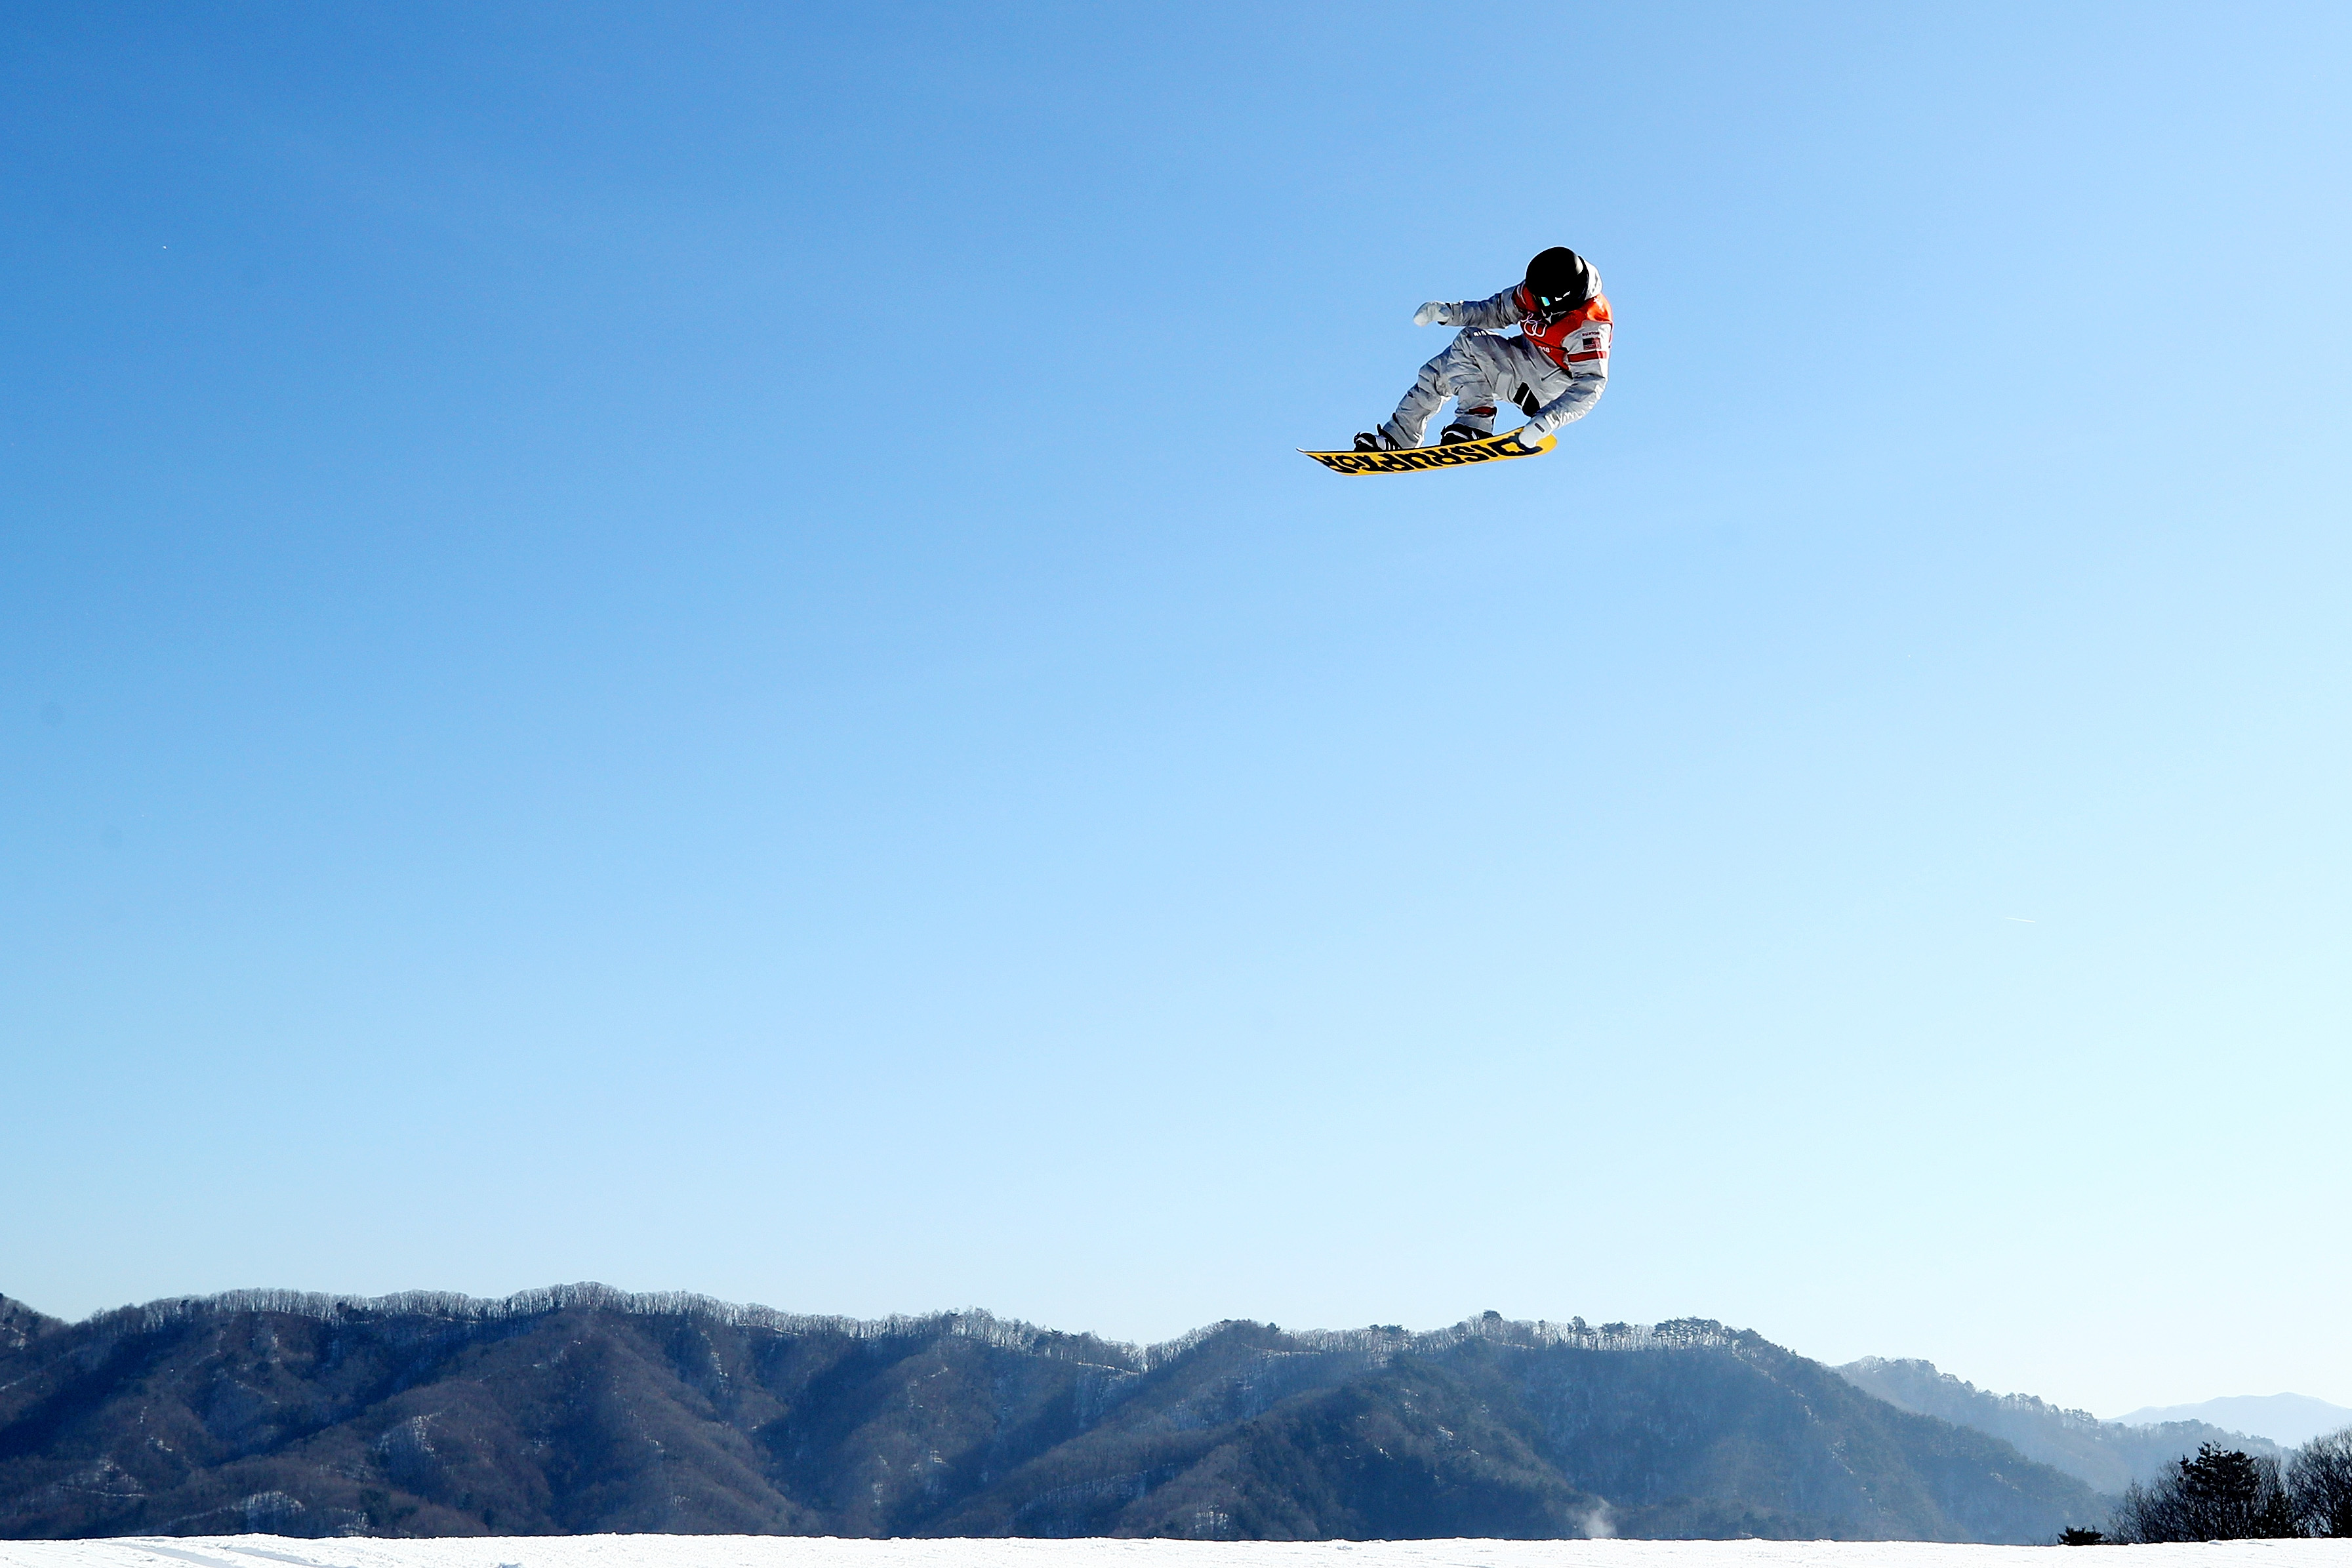 Meet Kyle Mack, Olympic snowboarder from Michigan